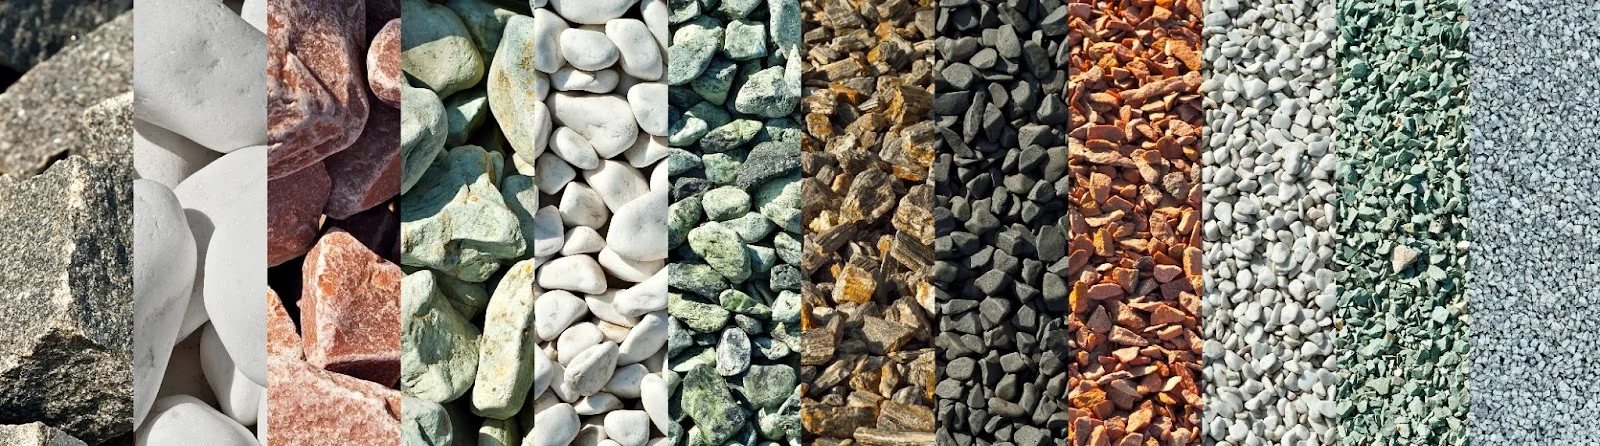 Variety of aggregates